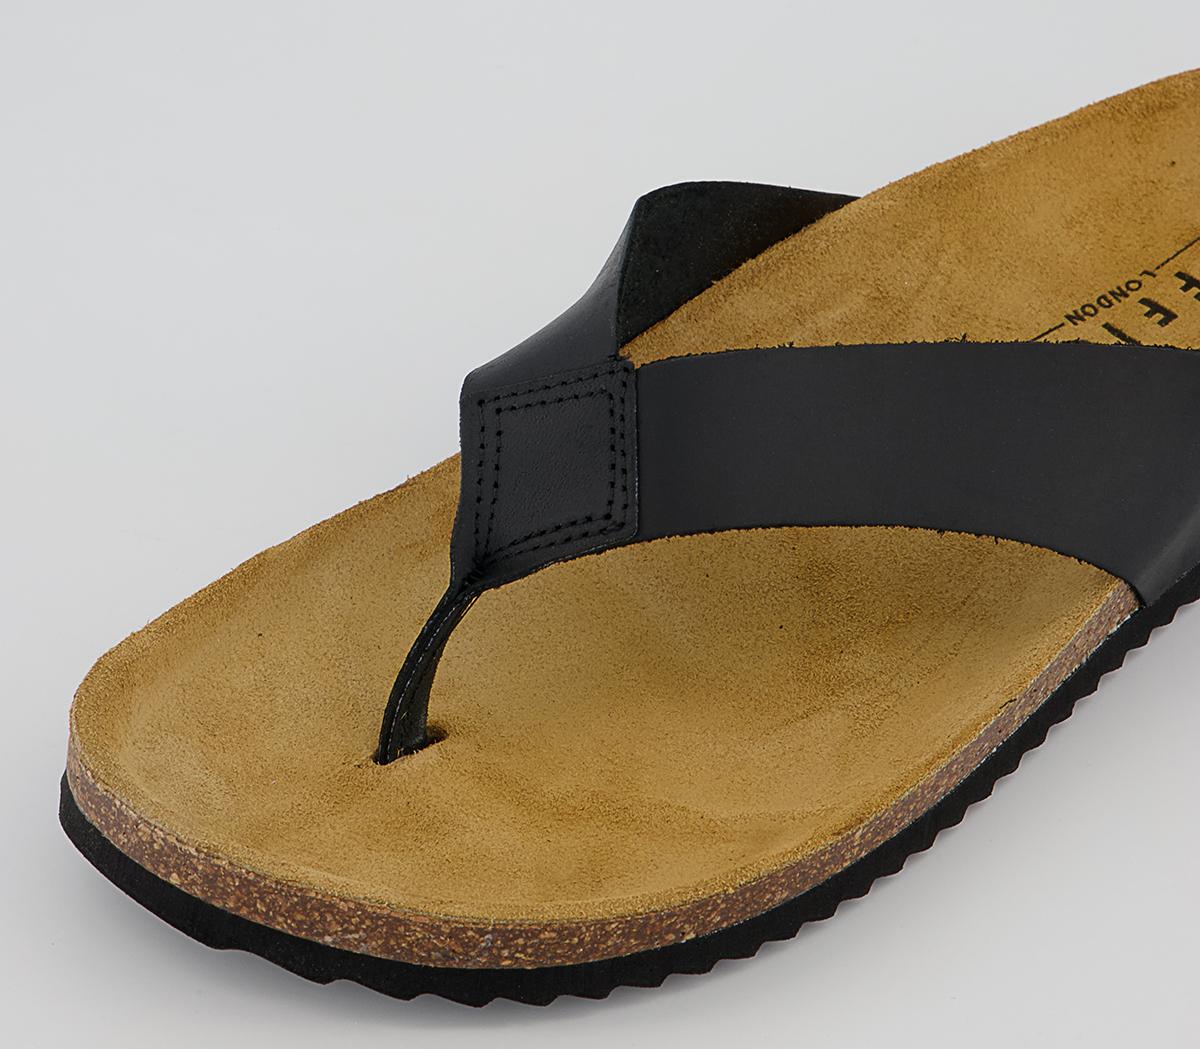 OFFICE Darwin Thong Sandals Black - Men's Casual Shoes